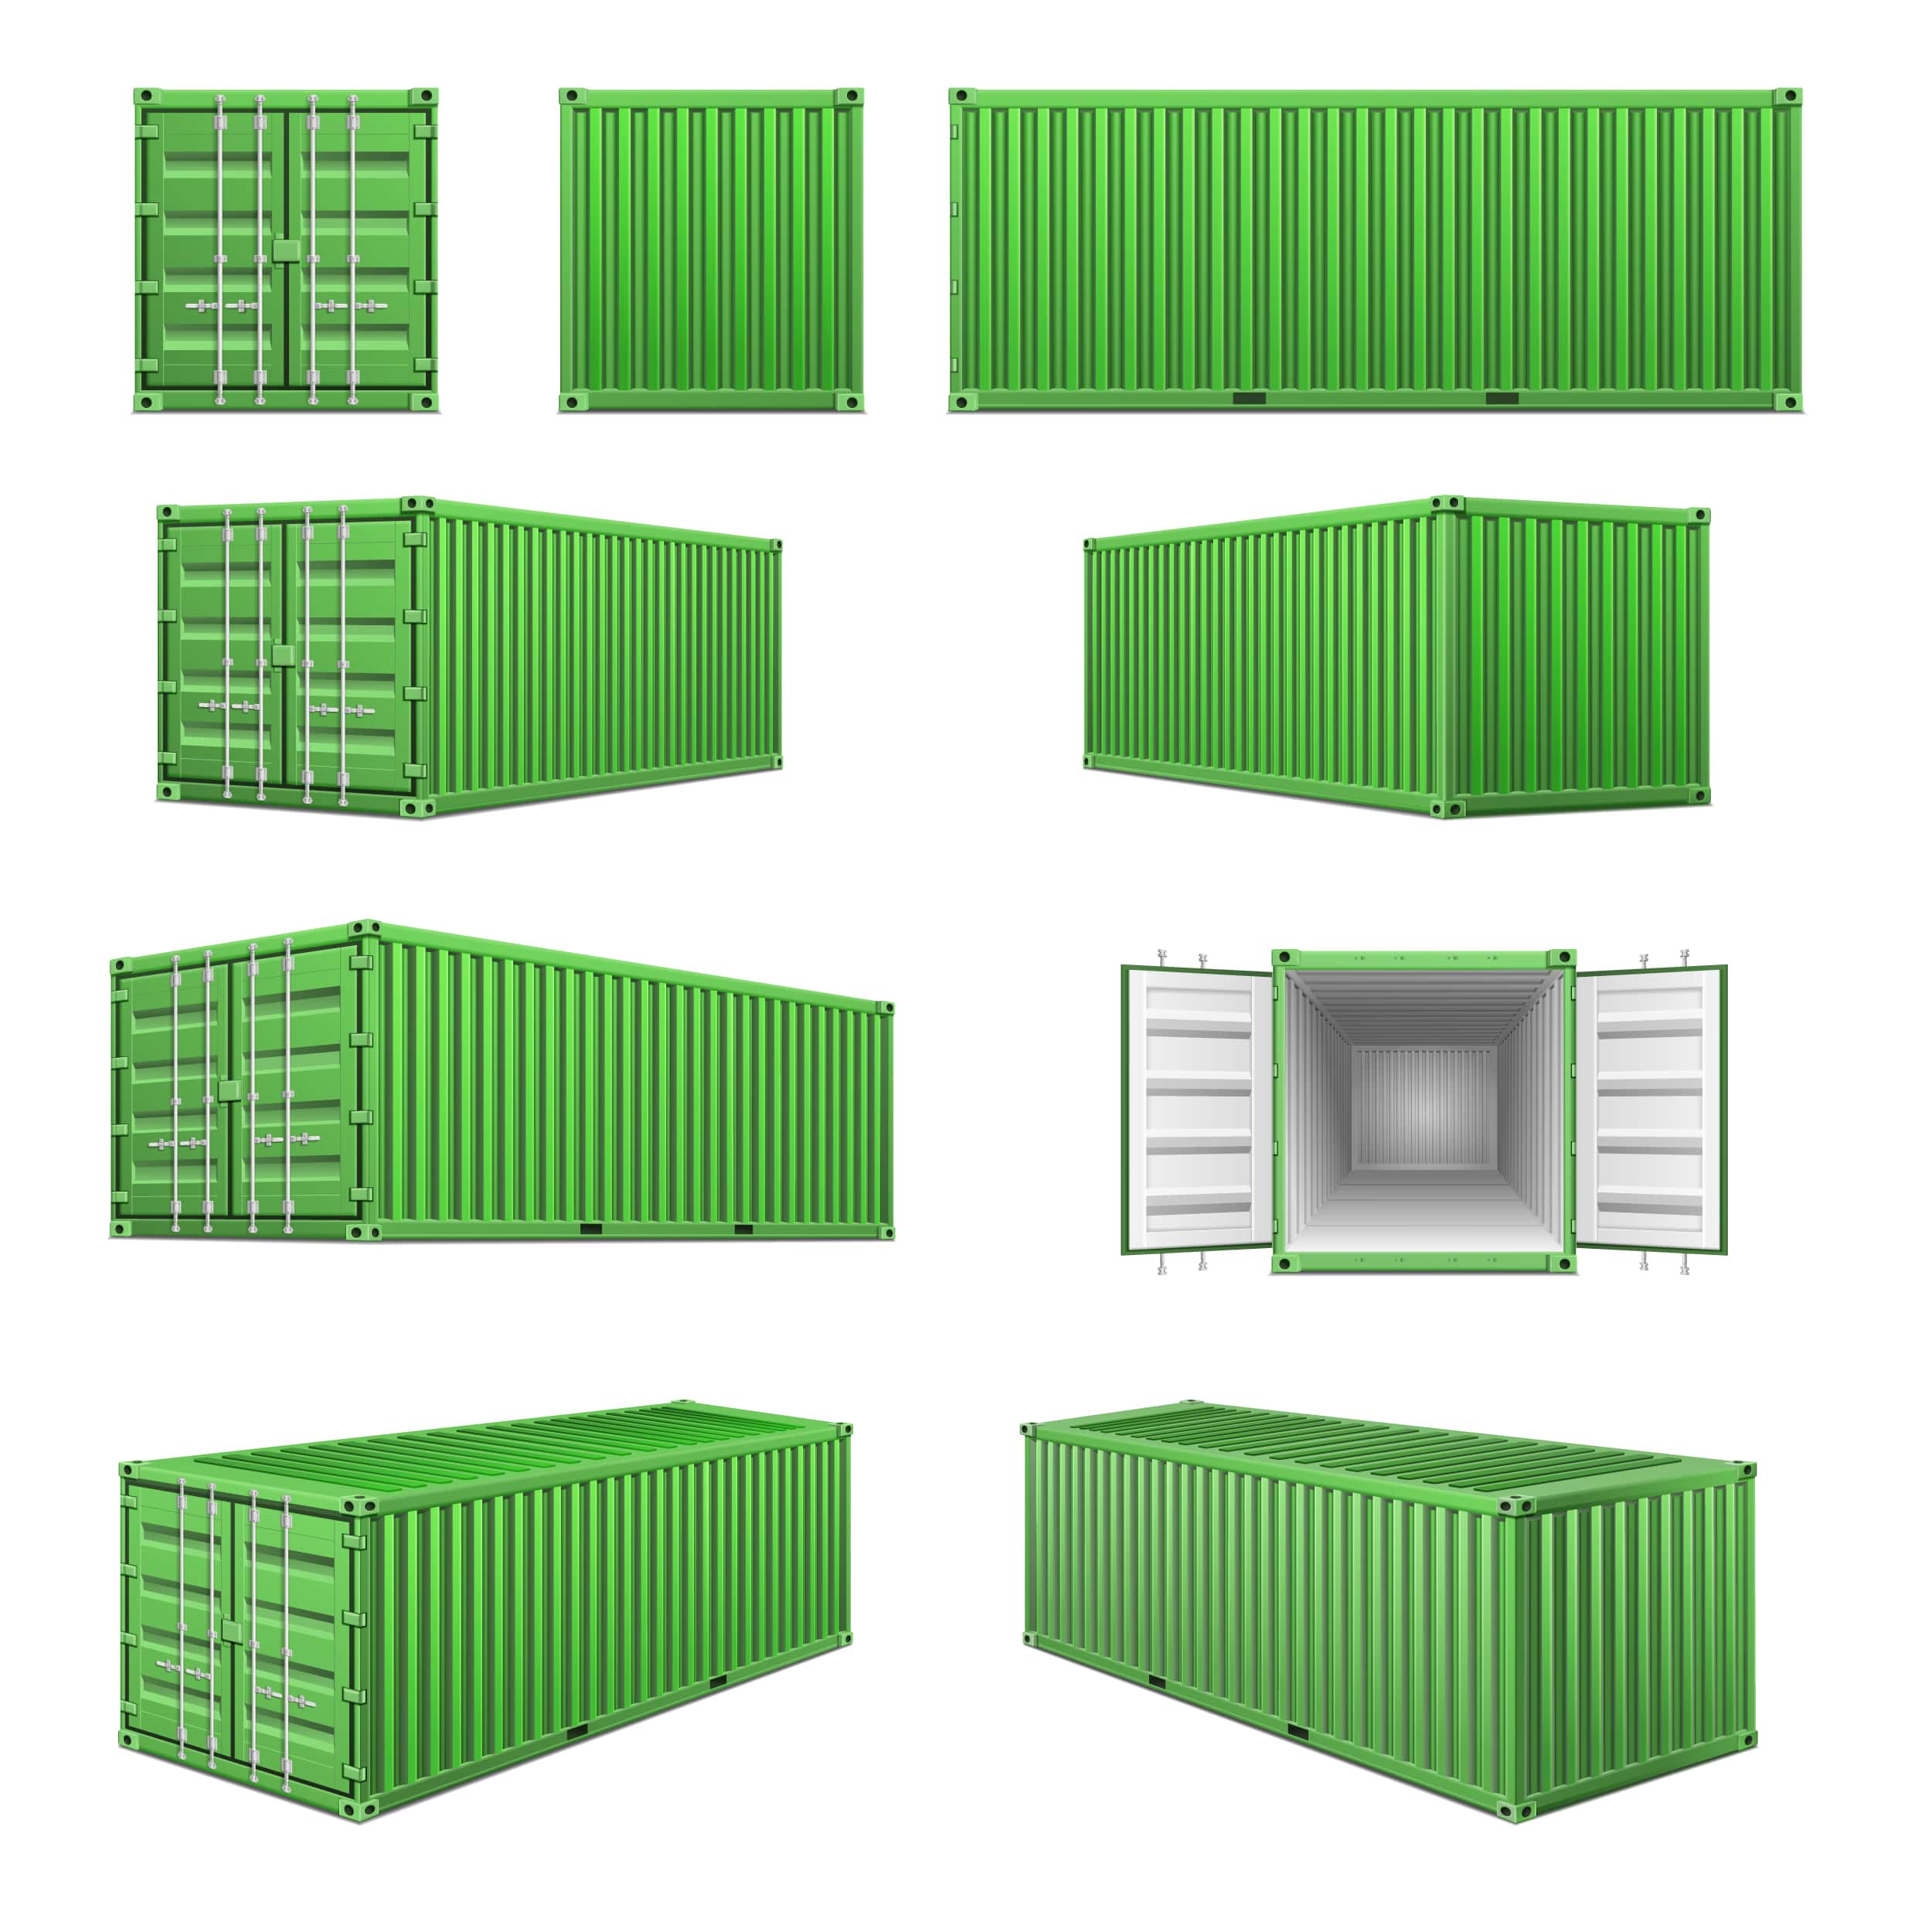 conex containers, shipping containers for sale, shipping containers, shipping containers